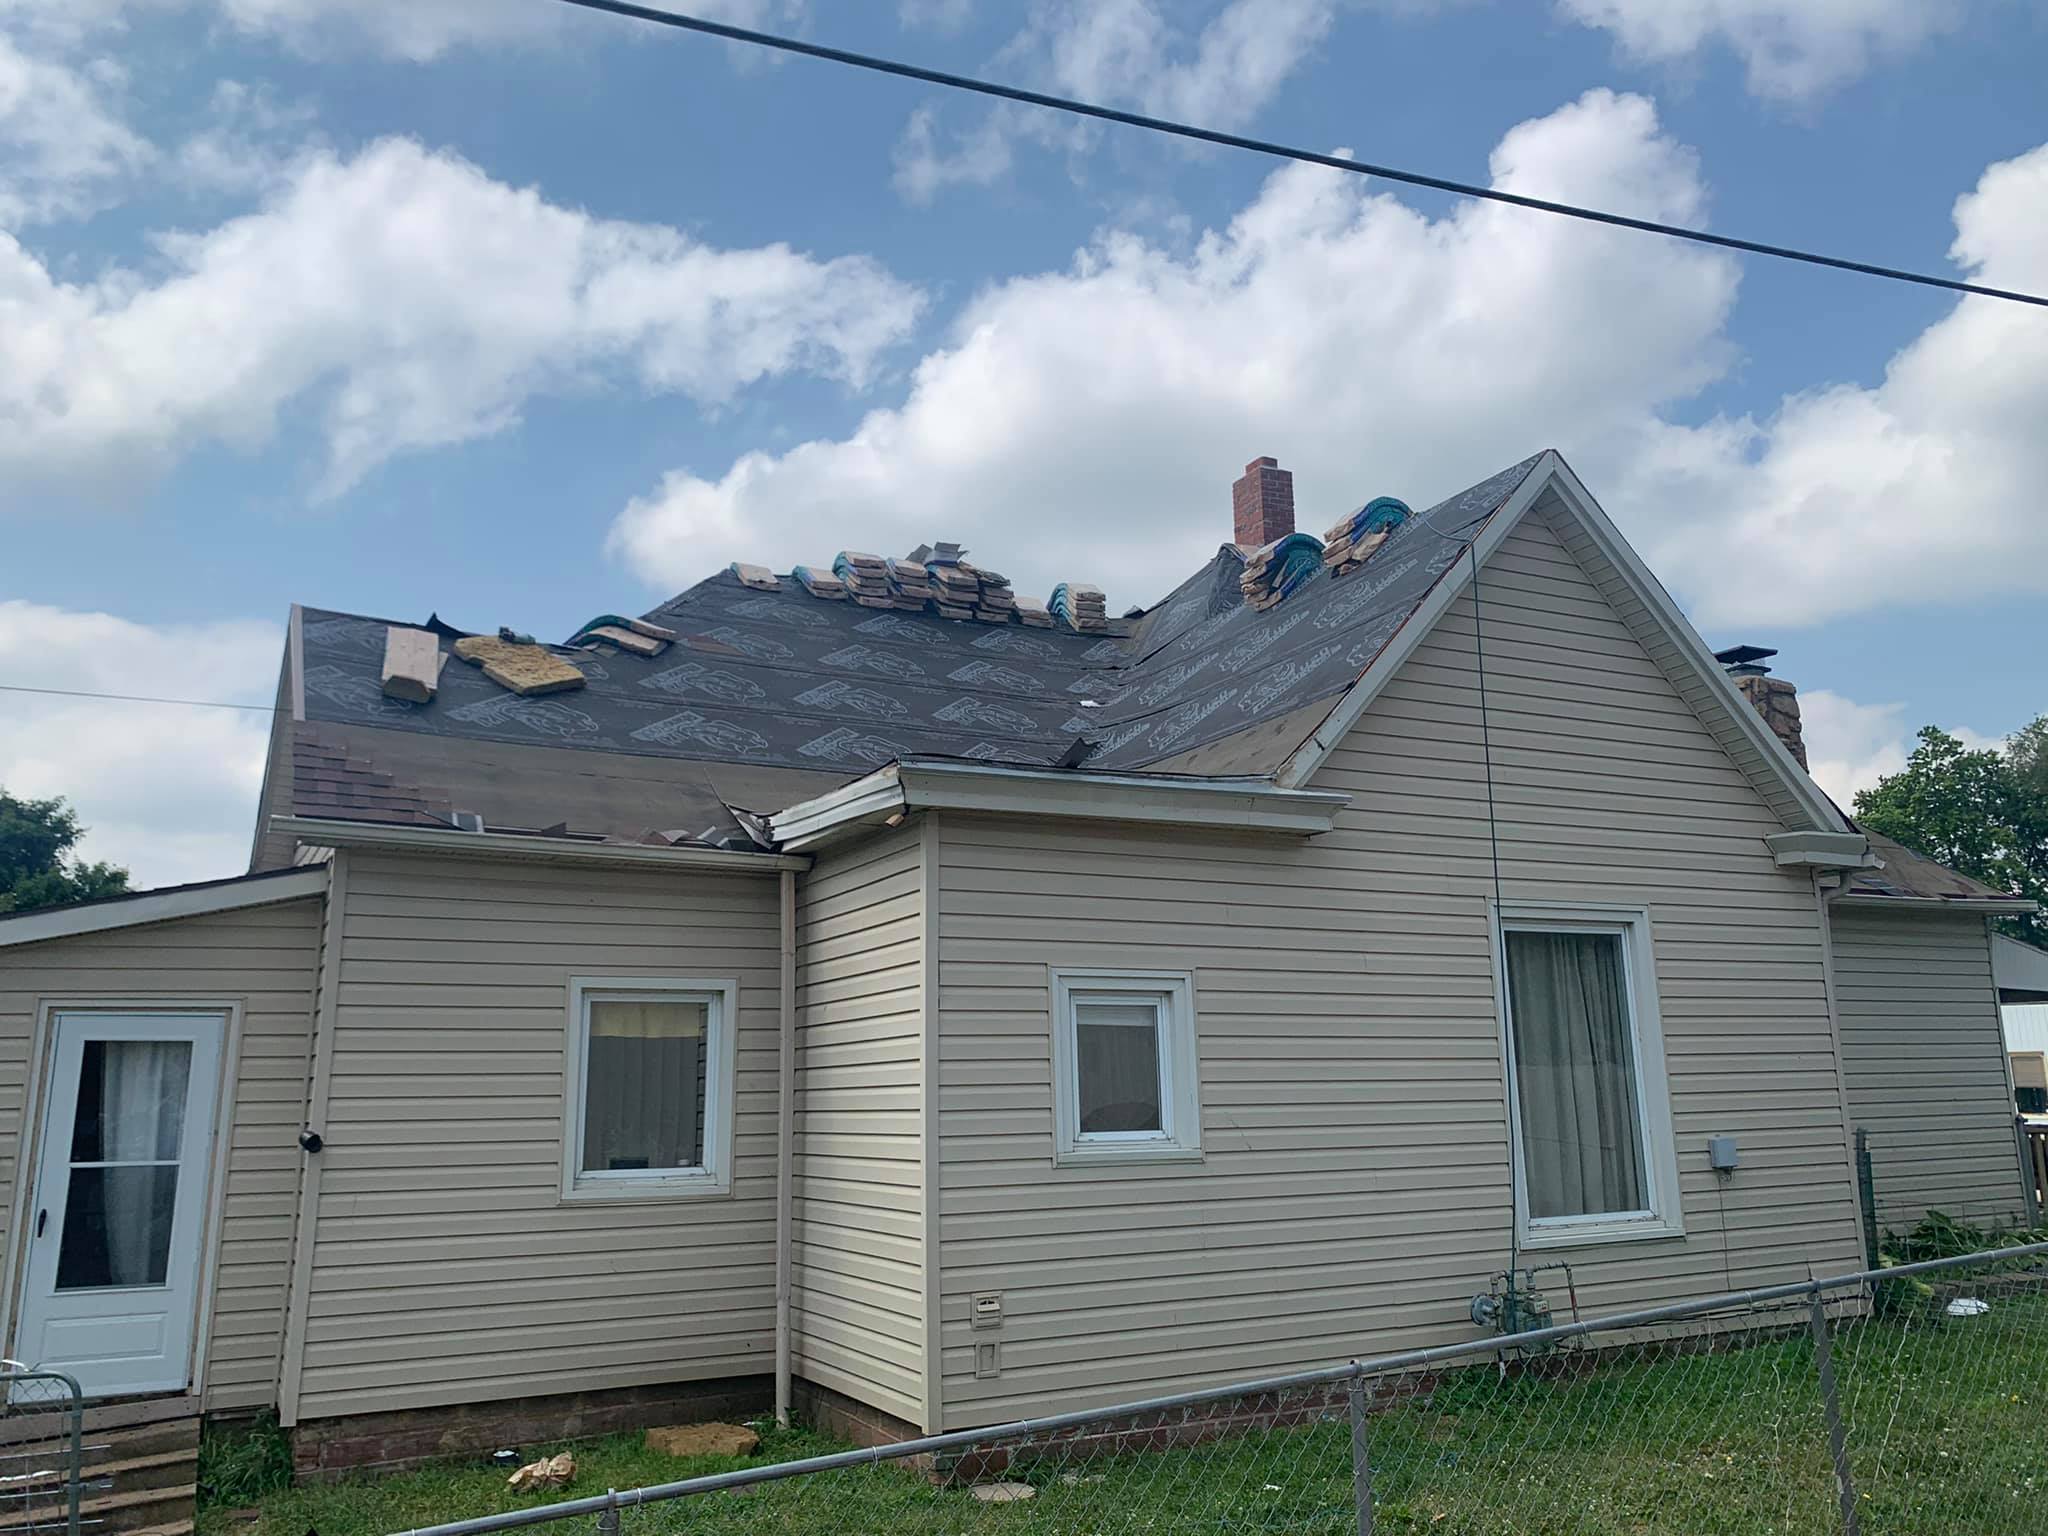 Roofing Contractors Savannah Missouri - Tips For Picking The Right One